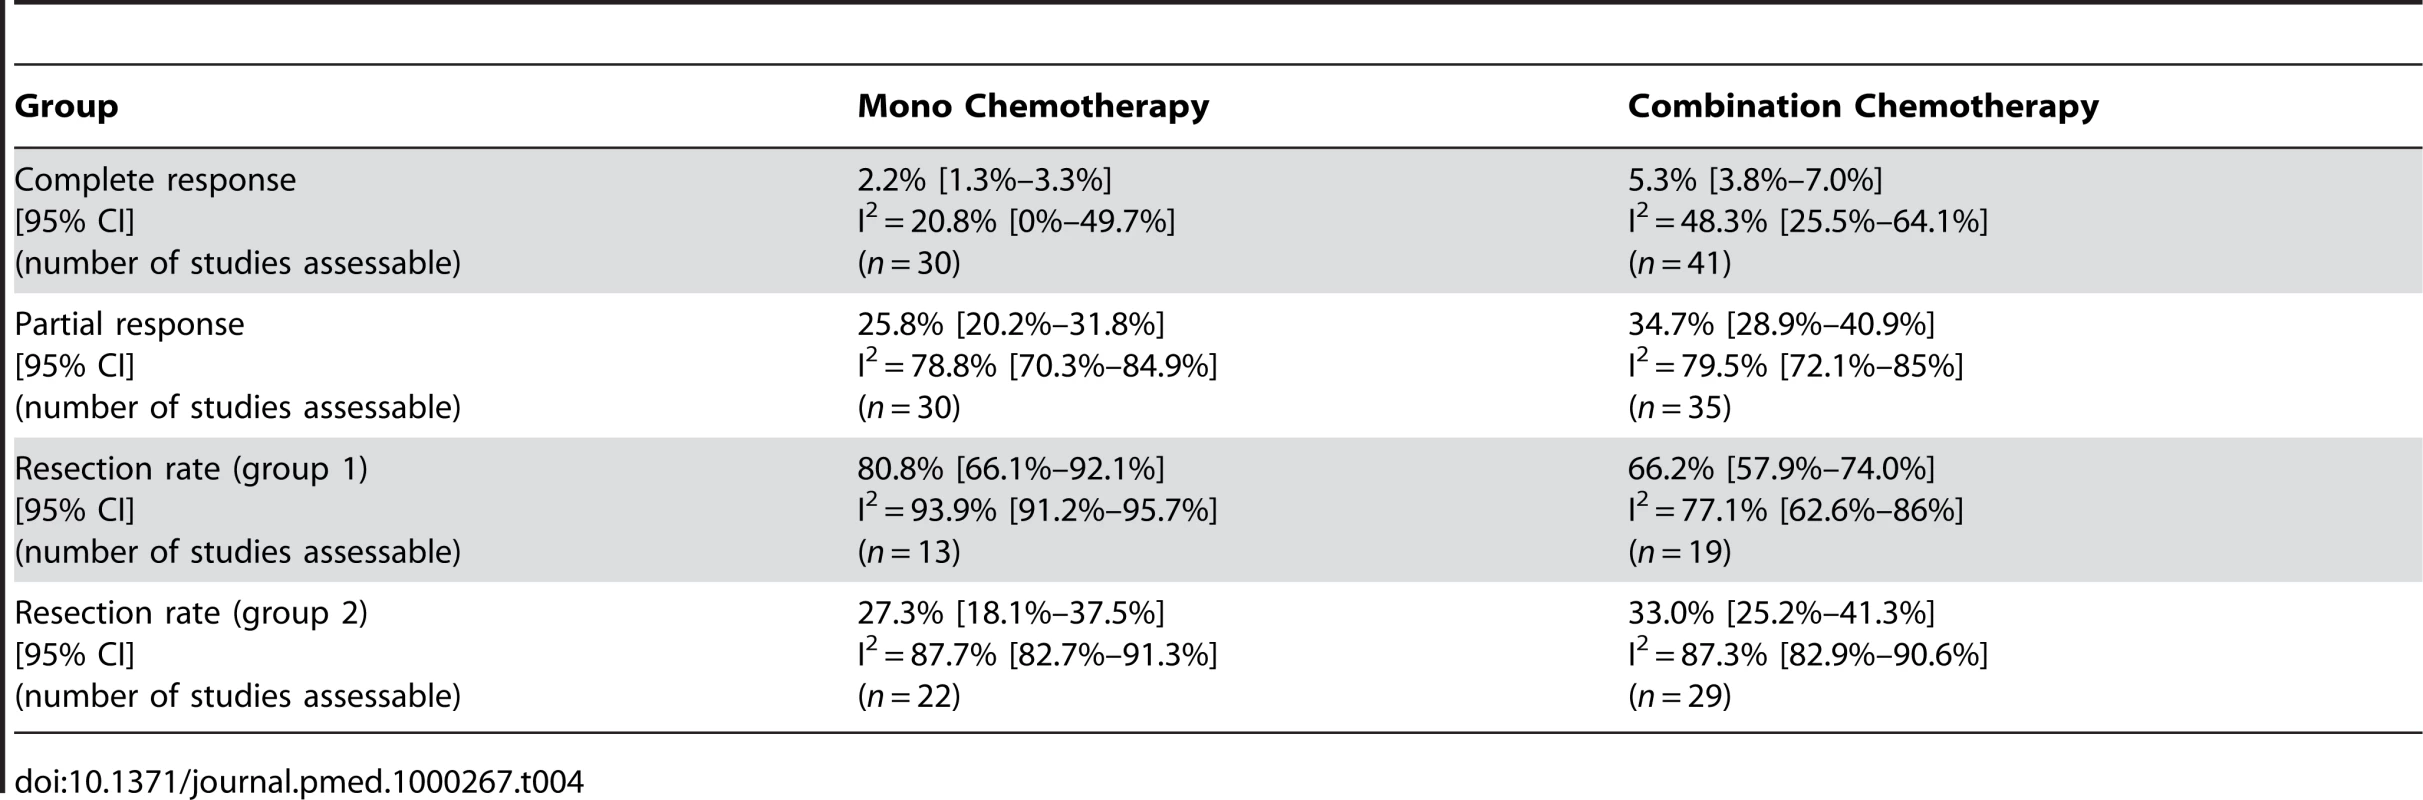 Estimates of percentage of responses and resections in patients receiving mono chemotherapy versus combination chemotherapy groups including the 95% confidence interval from the random effect model and number of assessable studies for each group (&lt;i&gt;n&lt;/i&gt;).